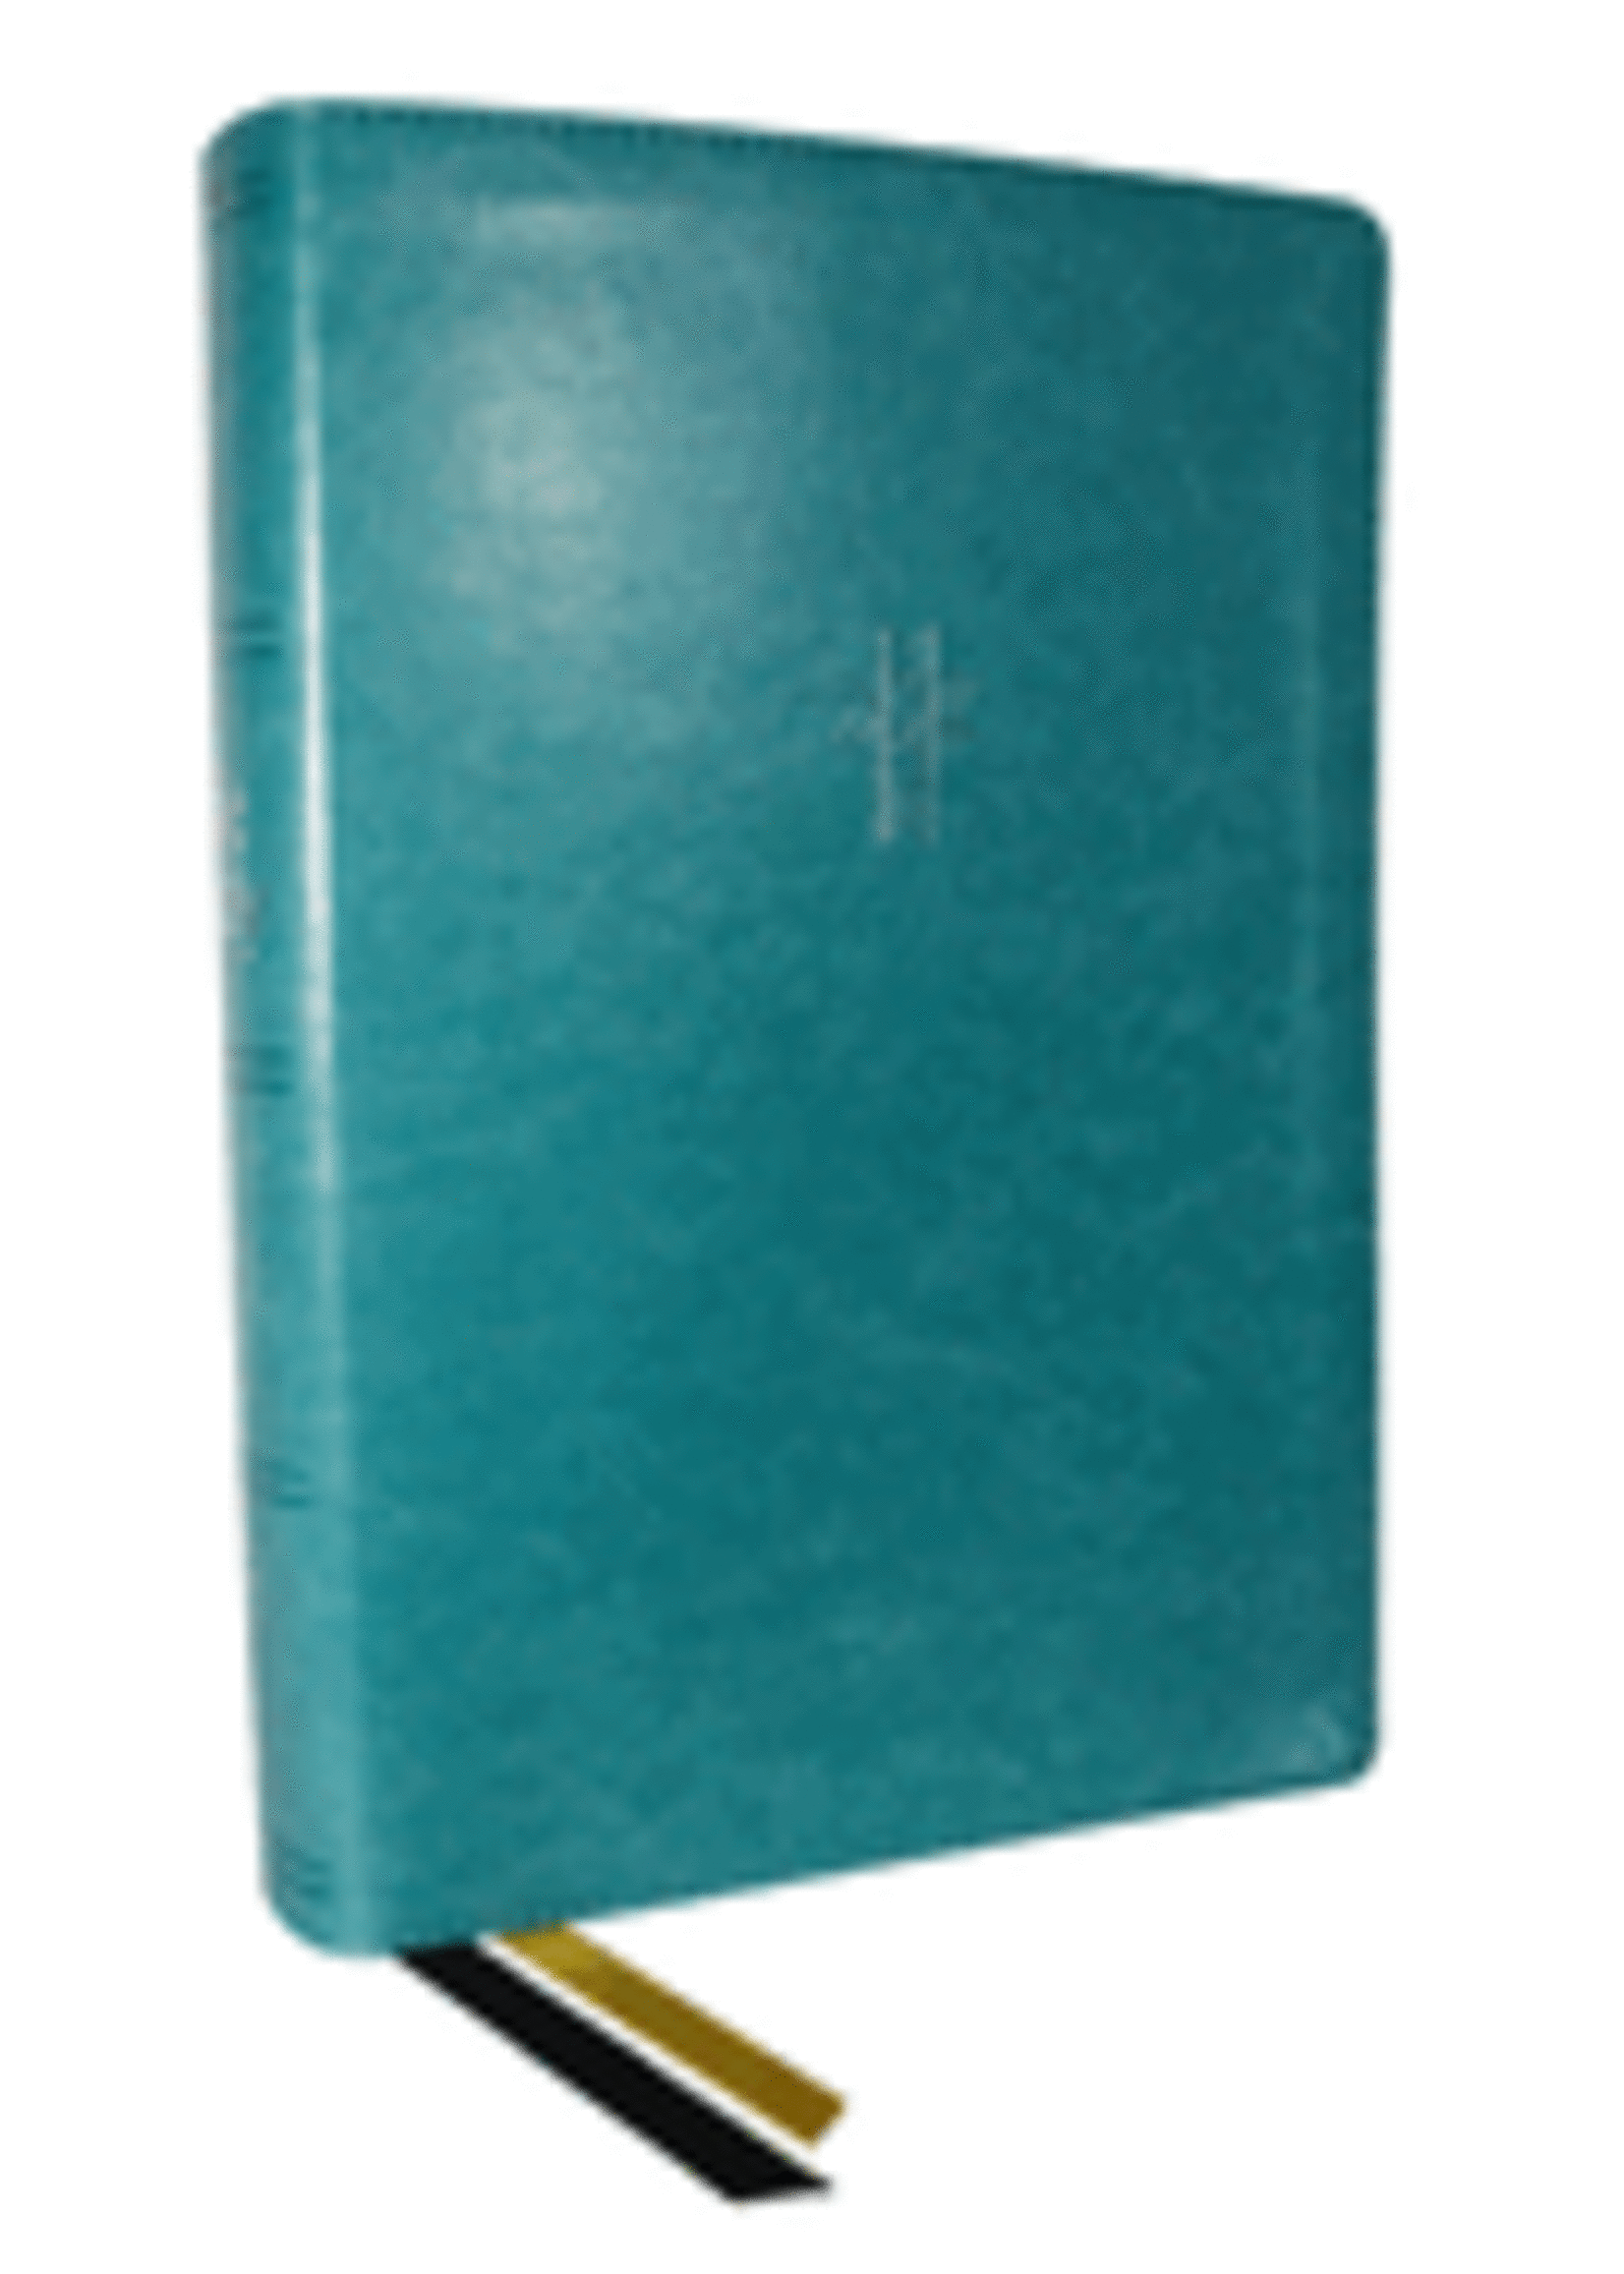 NKJV, the Bible Study Bible, Leathersoft, Turquoise, Comfort Print